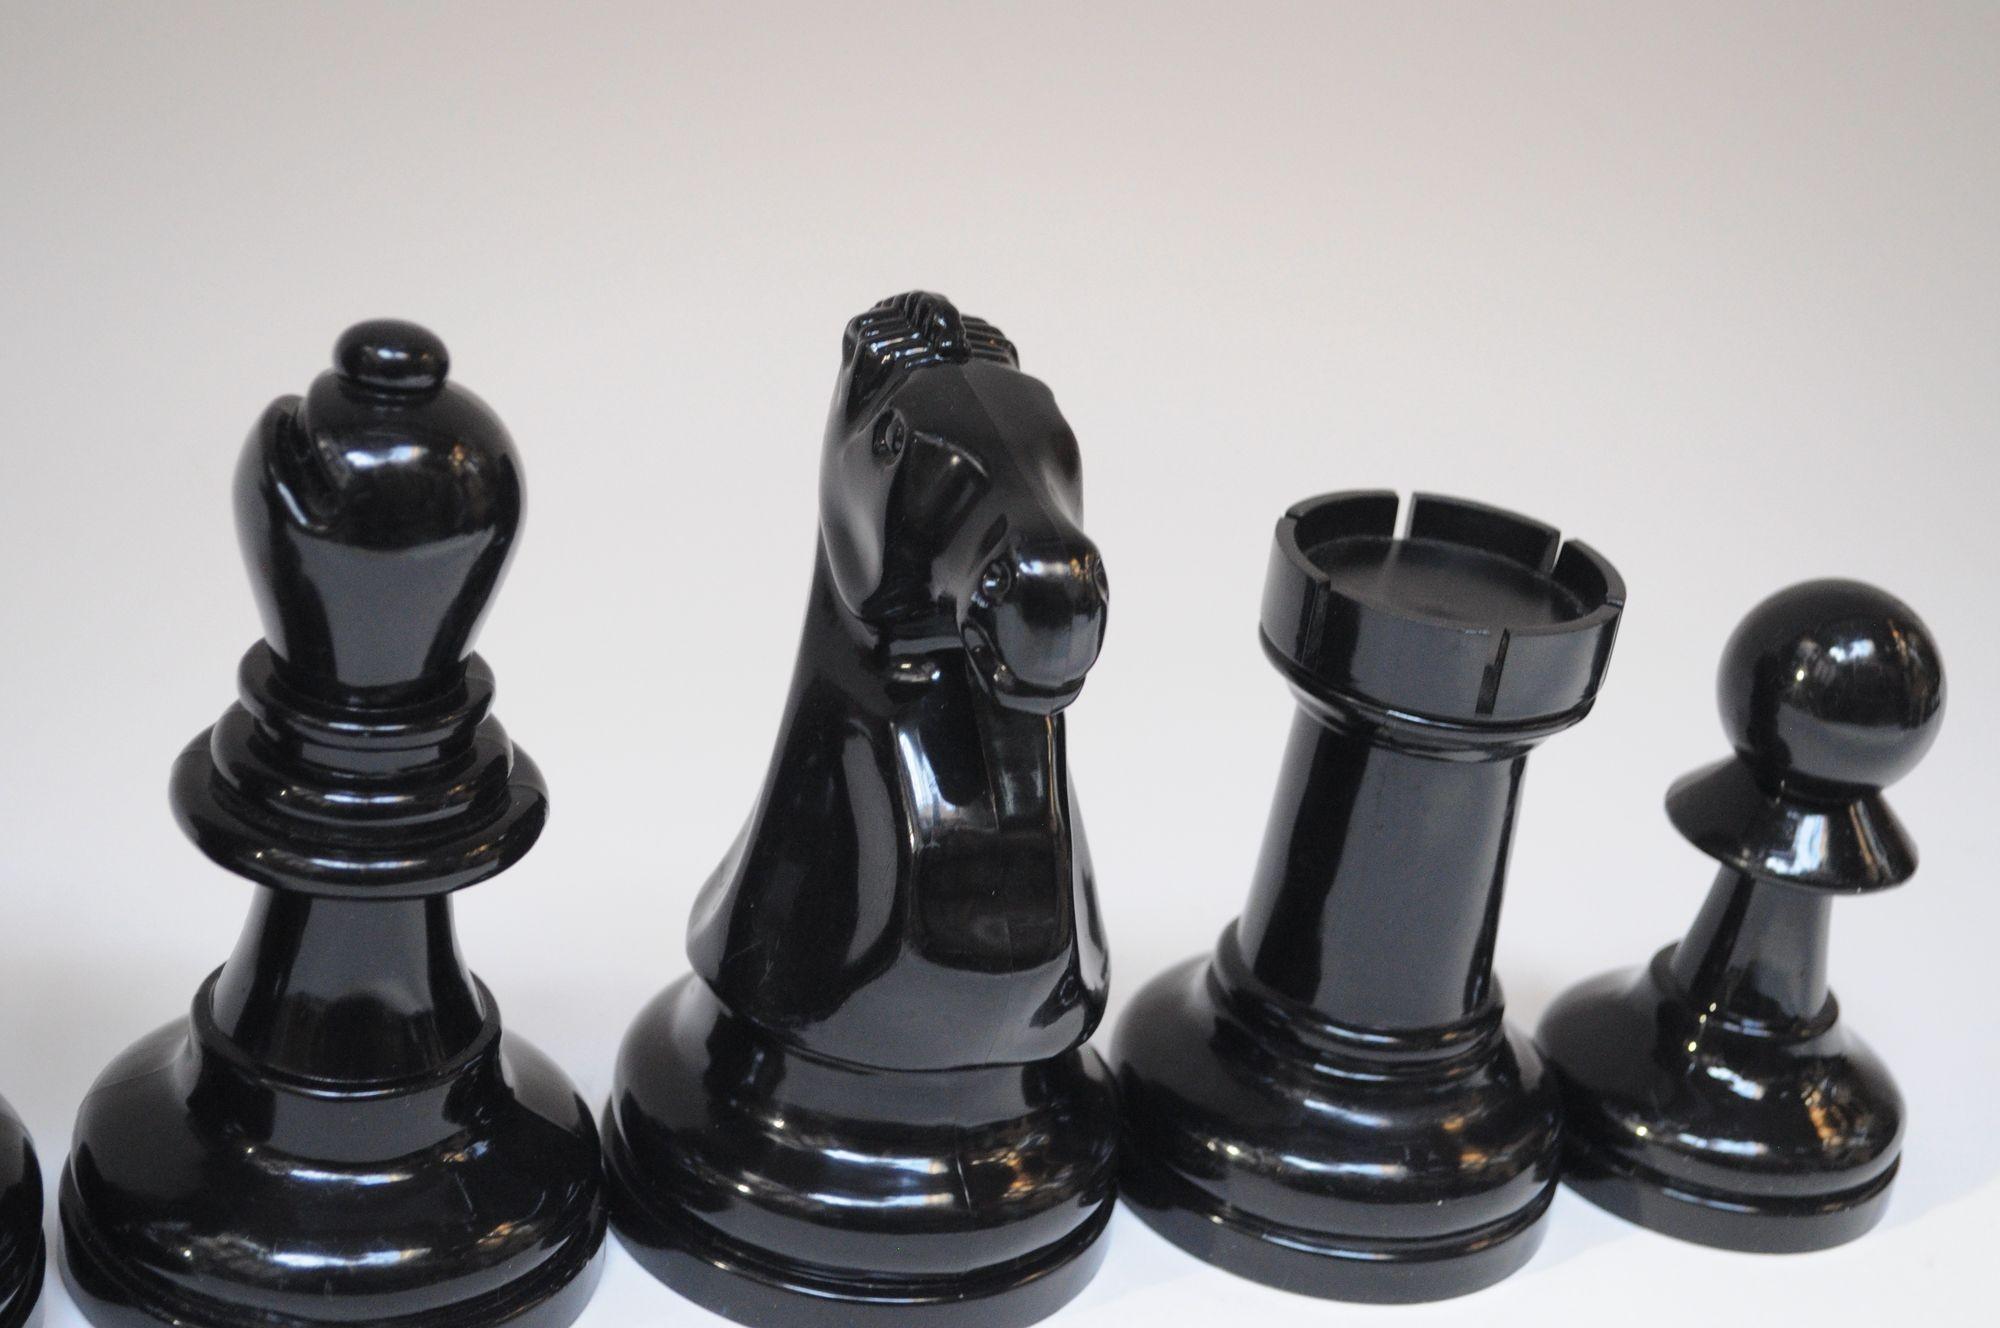 Felt Complete Set of Vintage Oversized Chess Pieces in Black and Cream Plastic For Sale